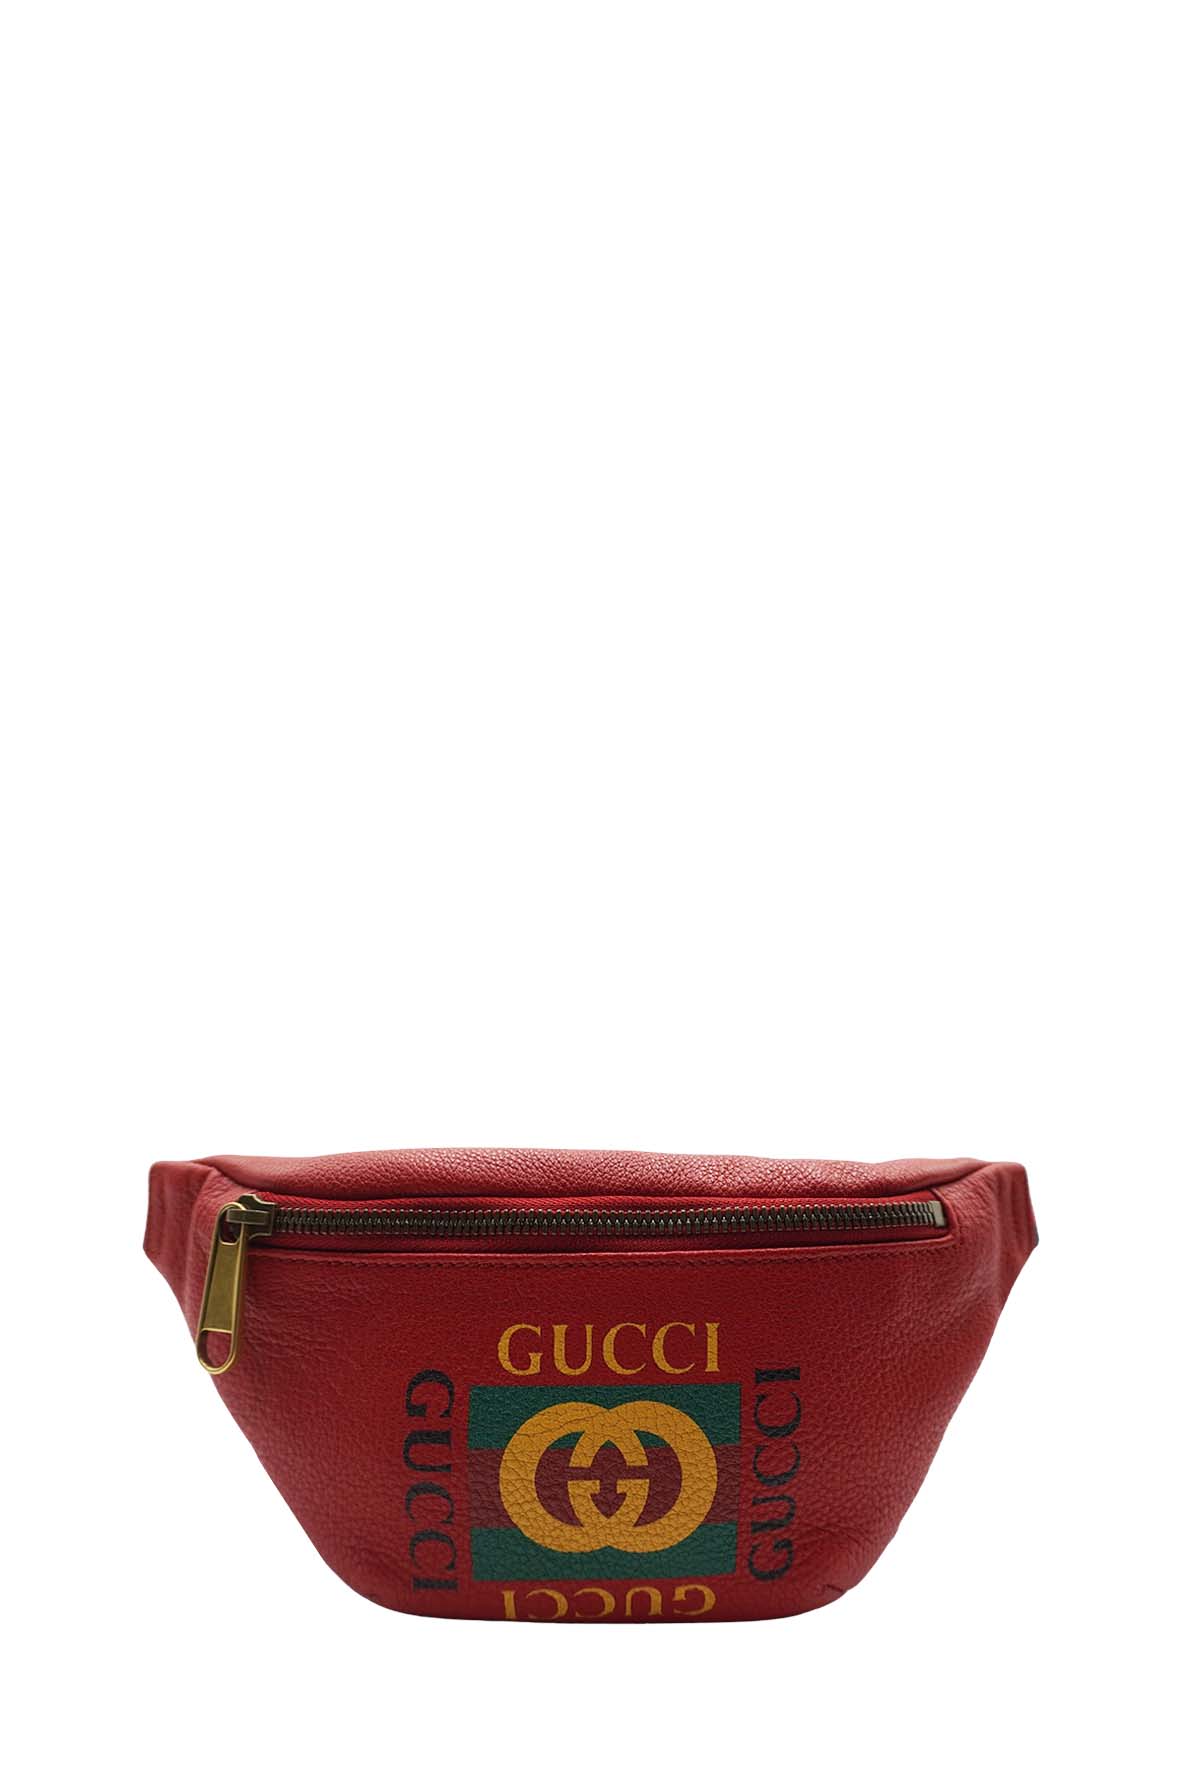 Gucci Signature Backpack Guccissima Small Hibiscus Red in Leather with  Chrome - US